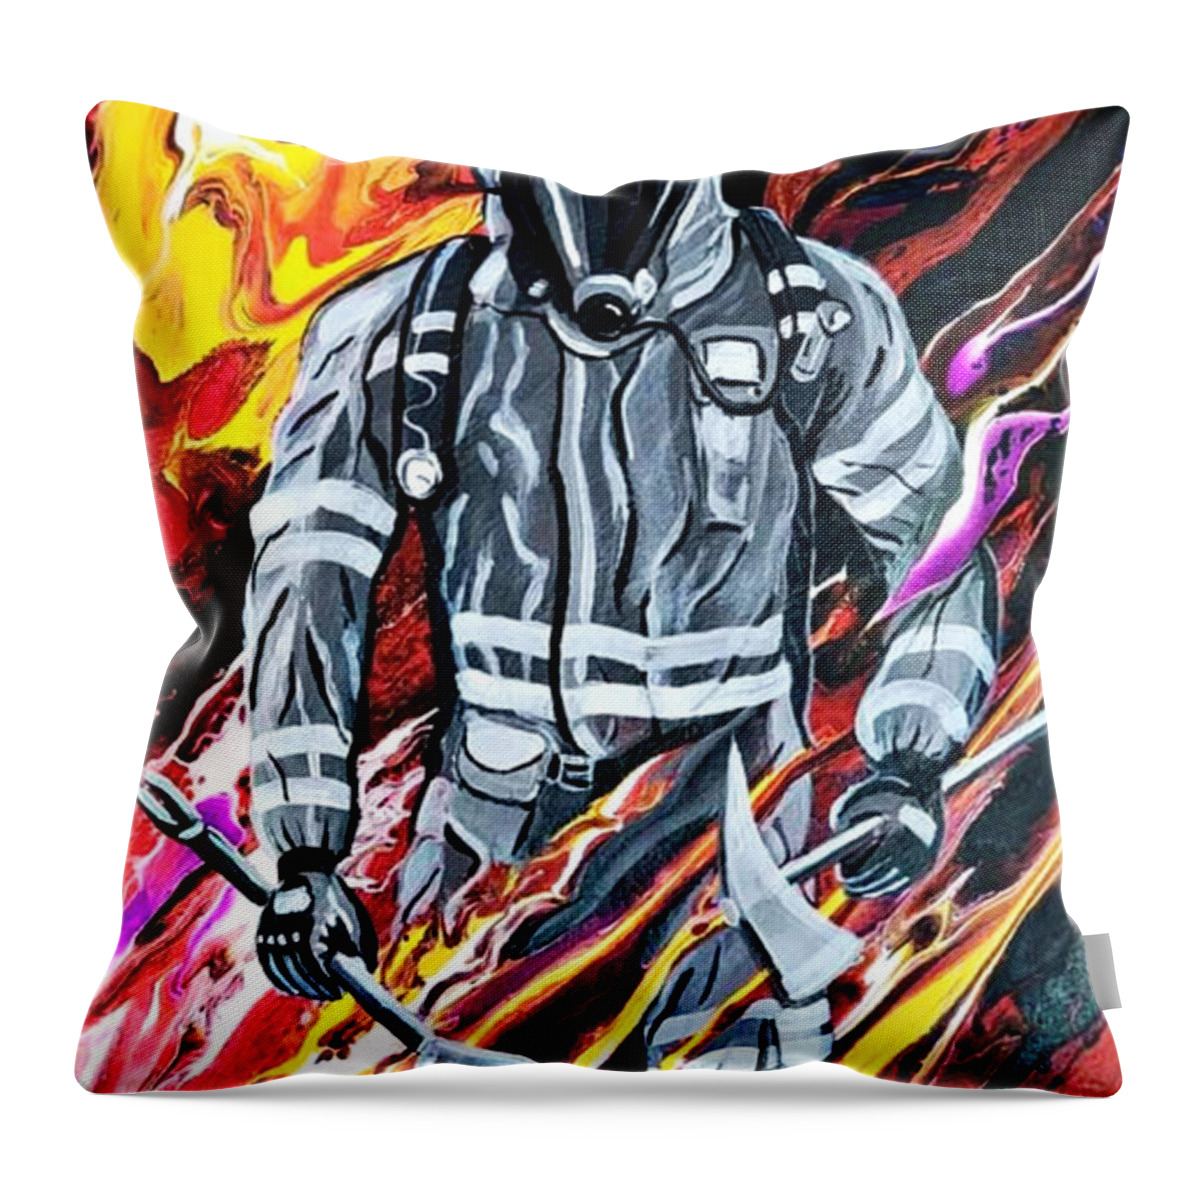 Fire Throw Pillow featuring the painting Fearless by Emanuel Alvarez Valencia